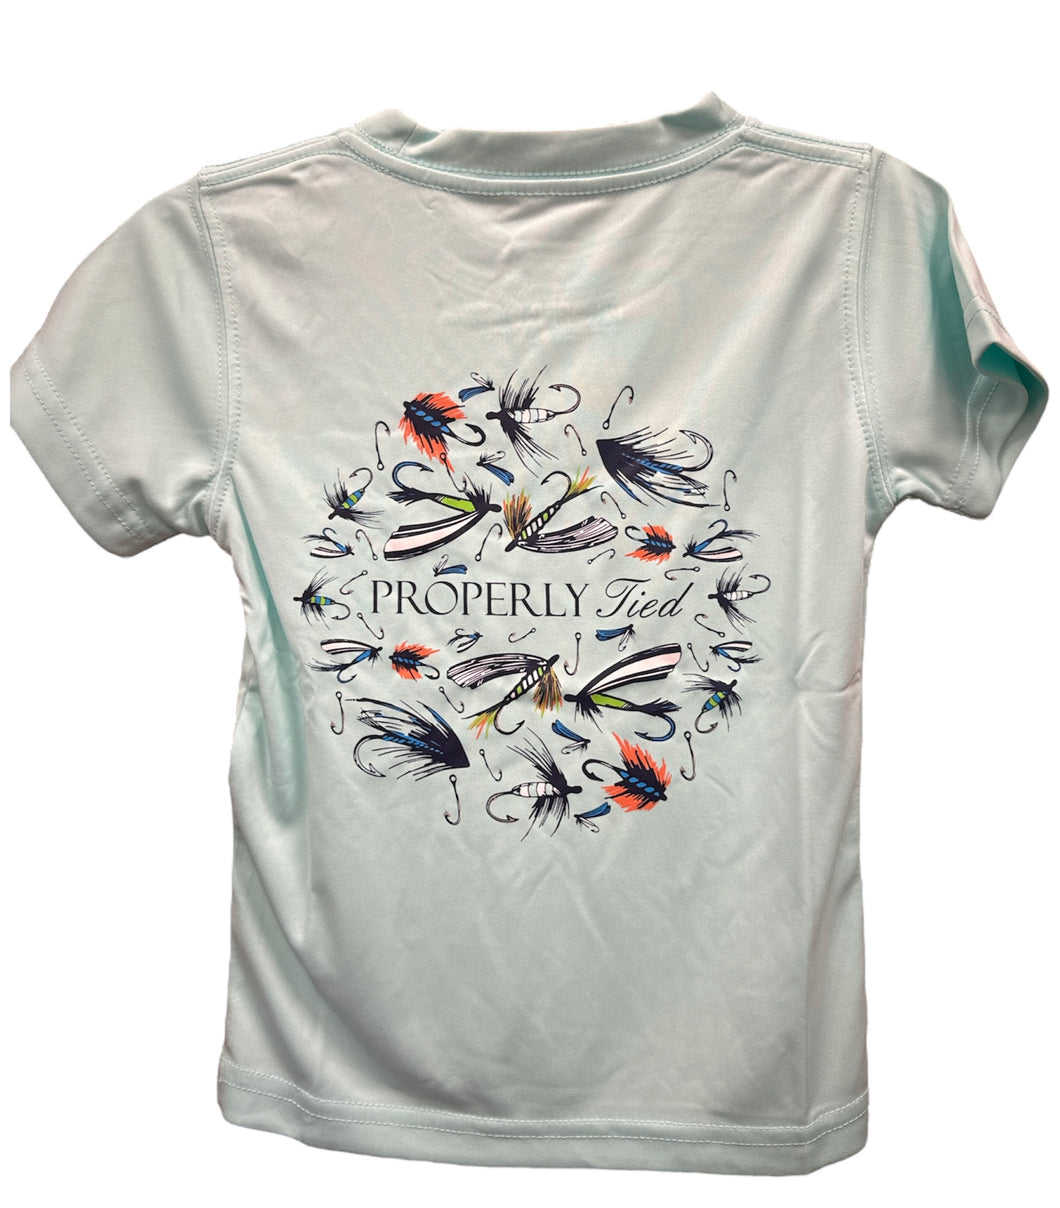 Fishing Performance Pocket Shirt by Properly Tied